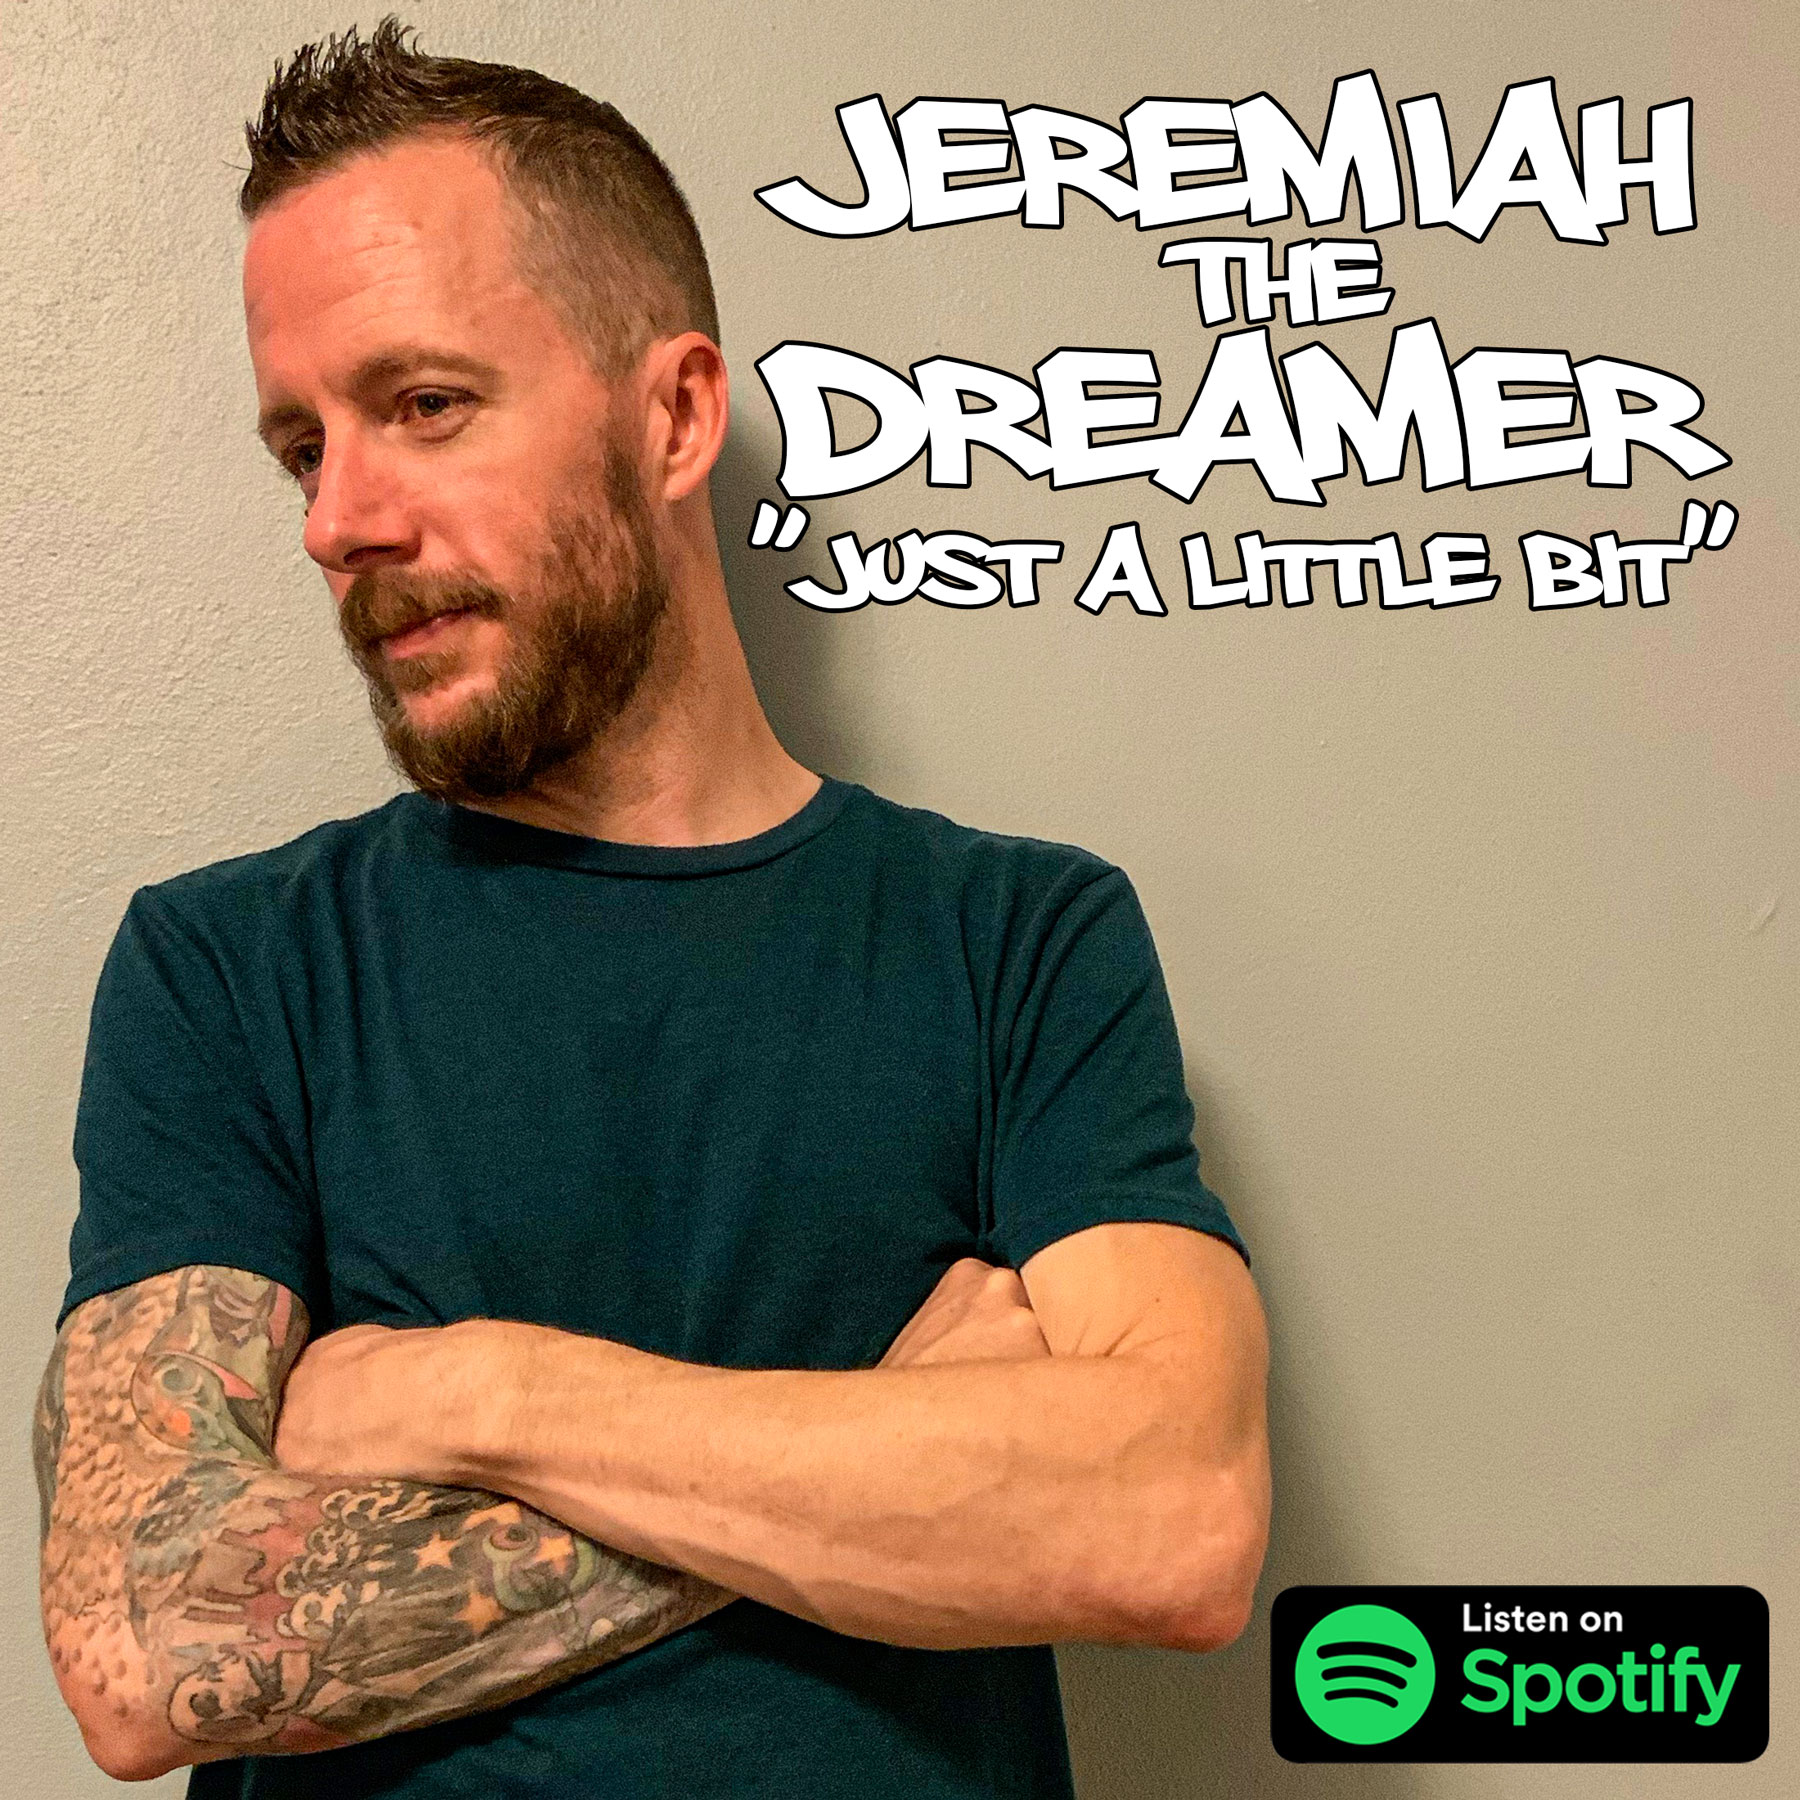 Just a Little Bit by Jeremiah the Dreamer